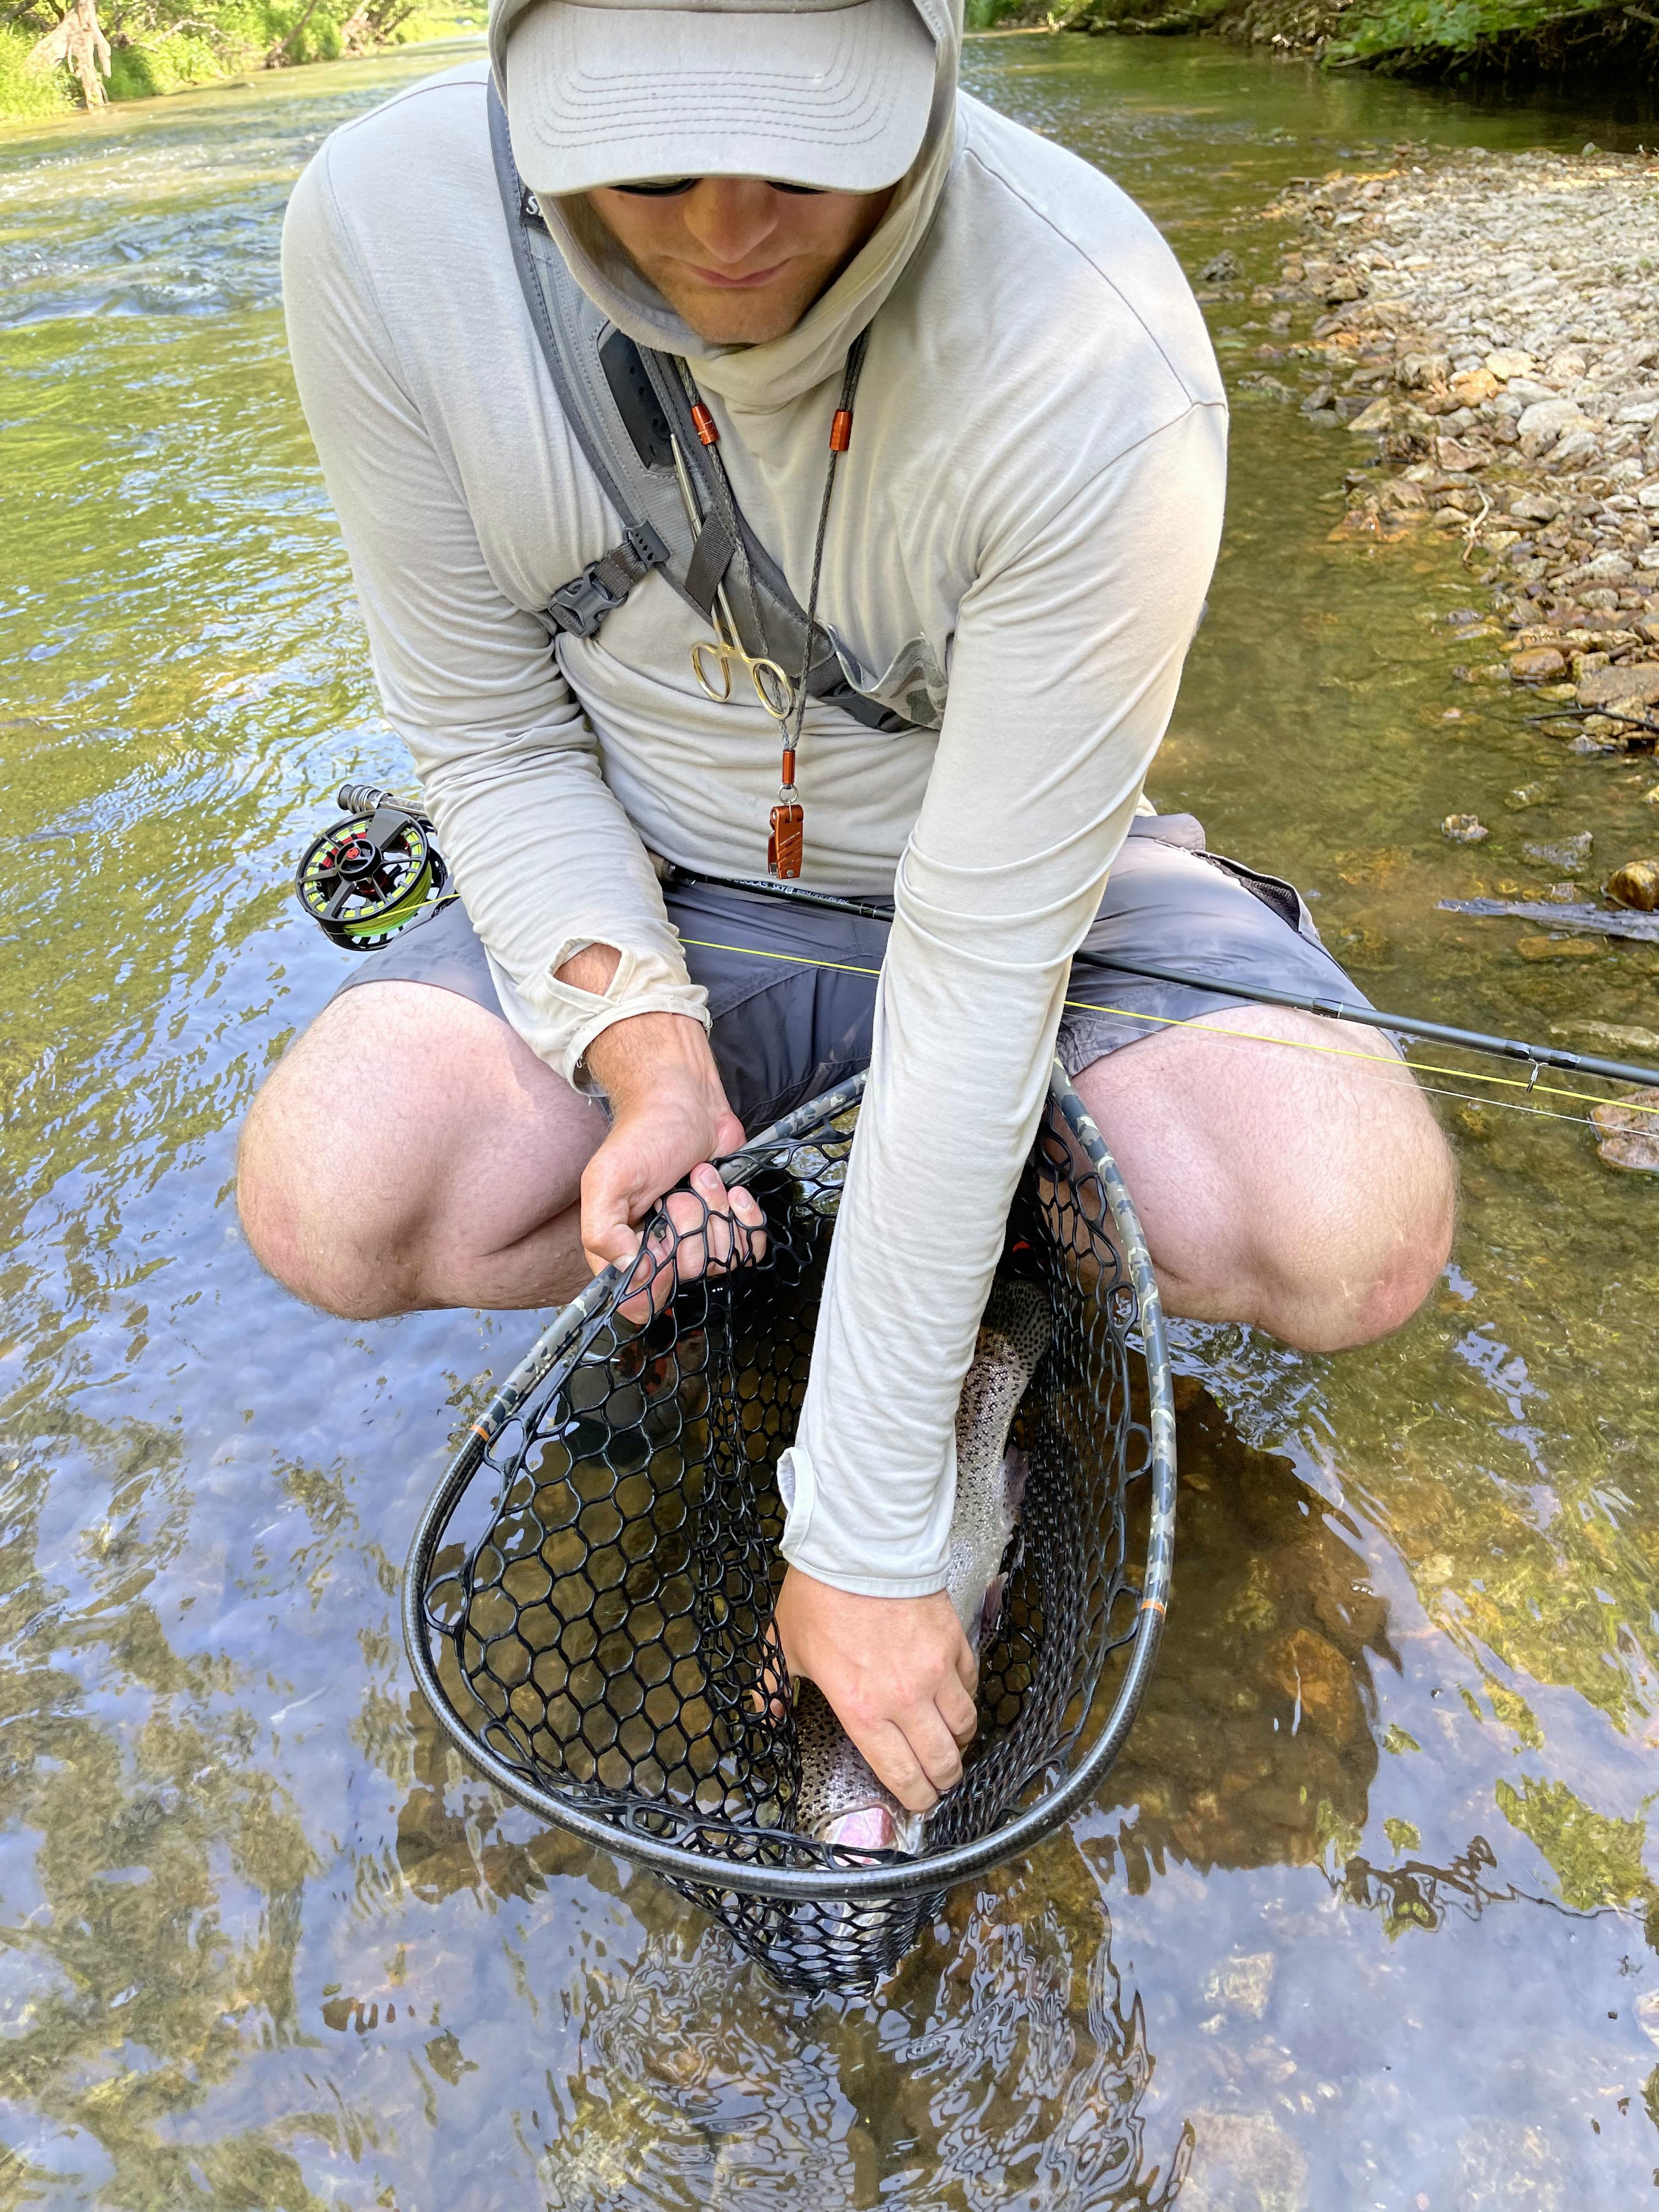 A fisherman with the Lamson Speedster S Fly Reel.